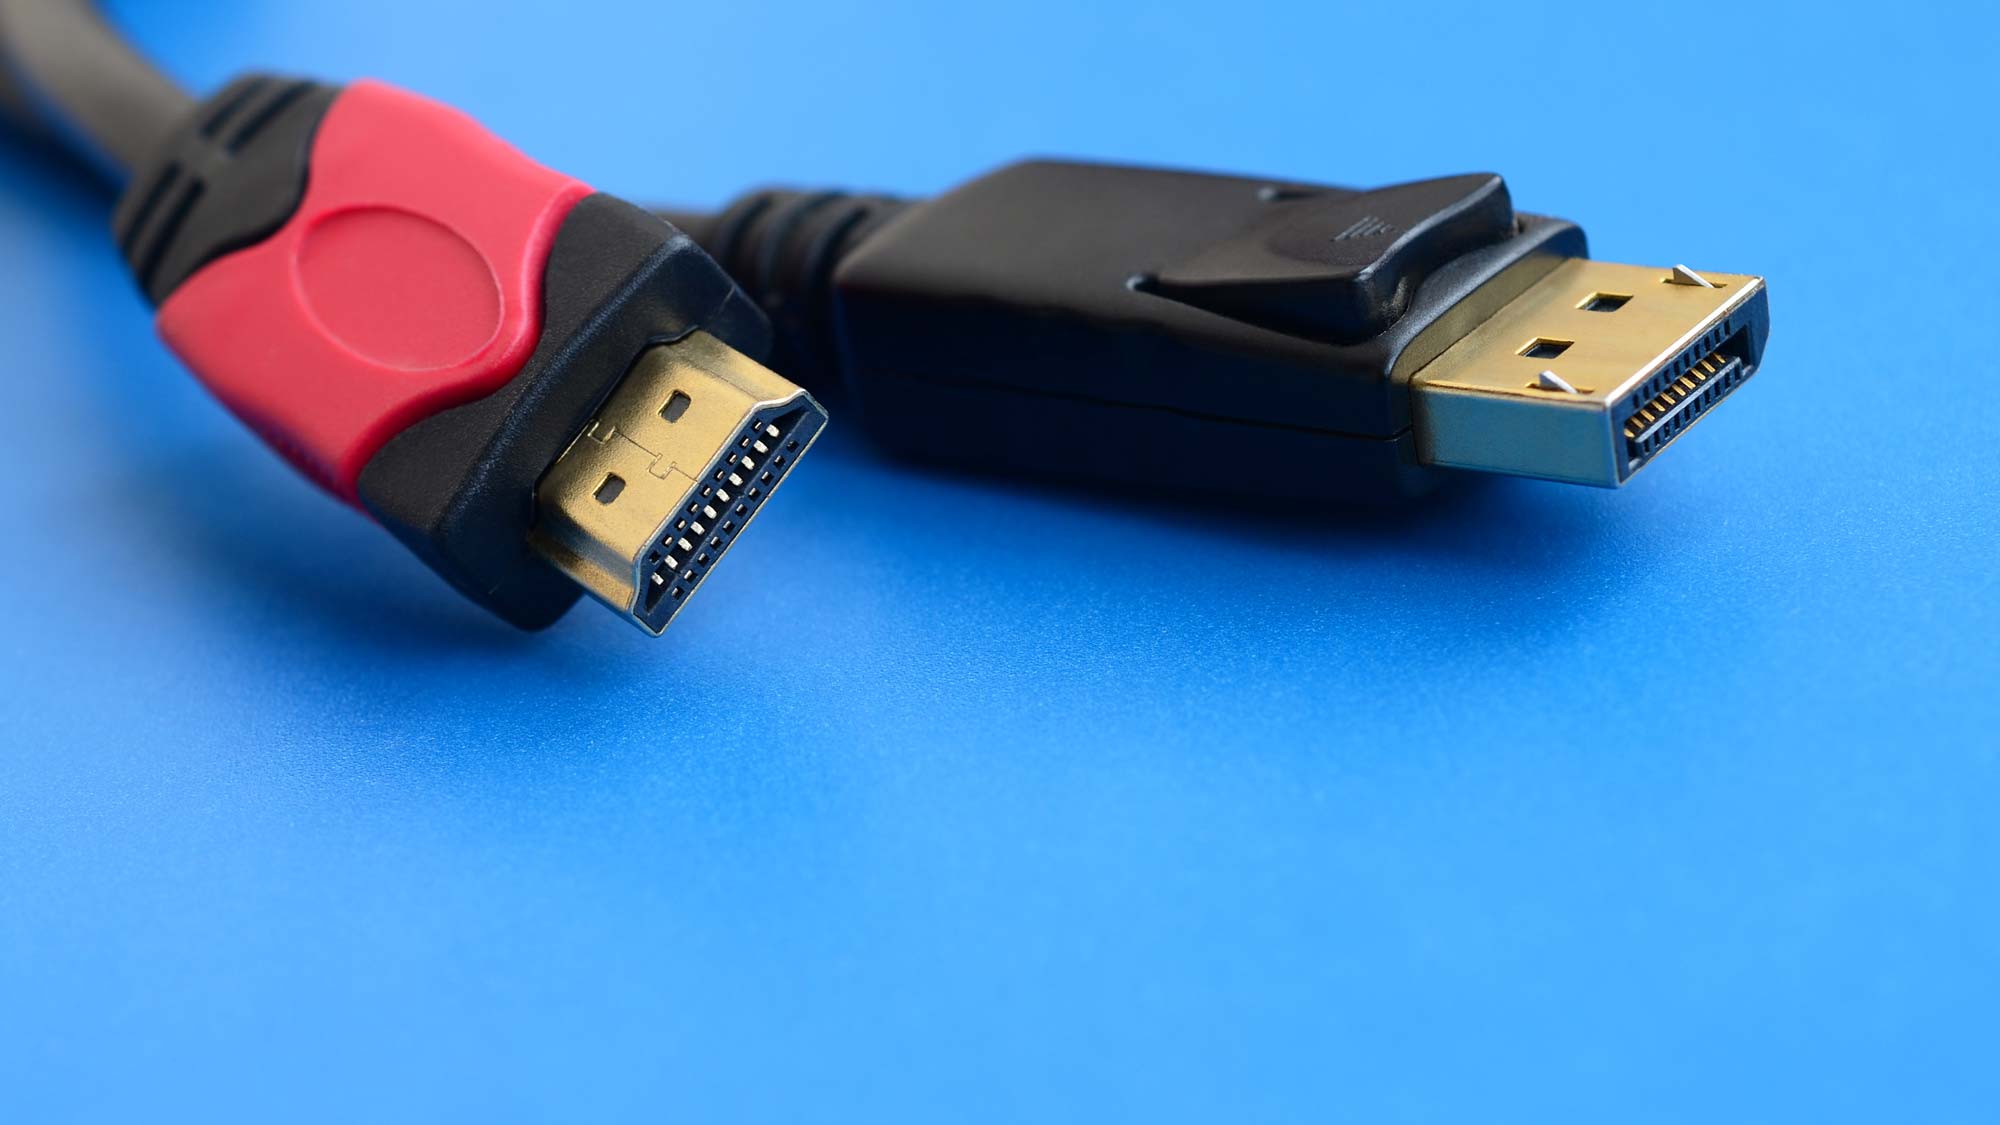 DisplayPort vs. HDMI: connector is better for TV, PC gaming and more | Tom's Guide